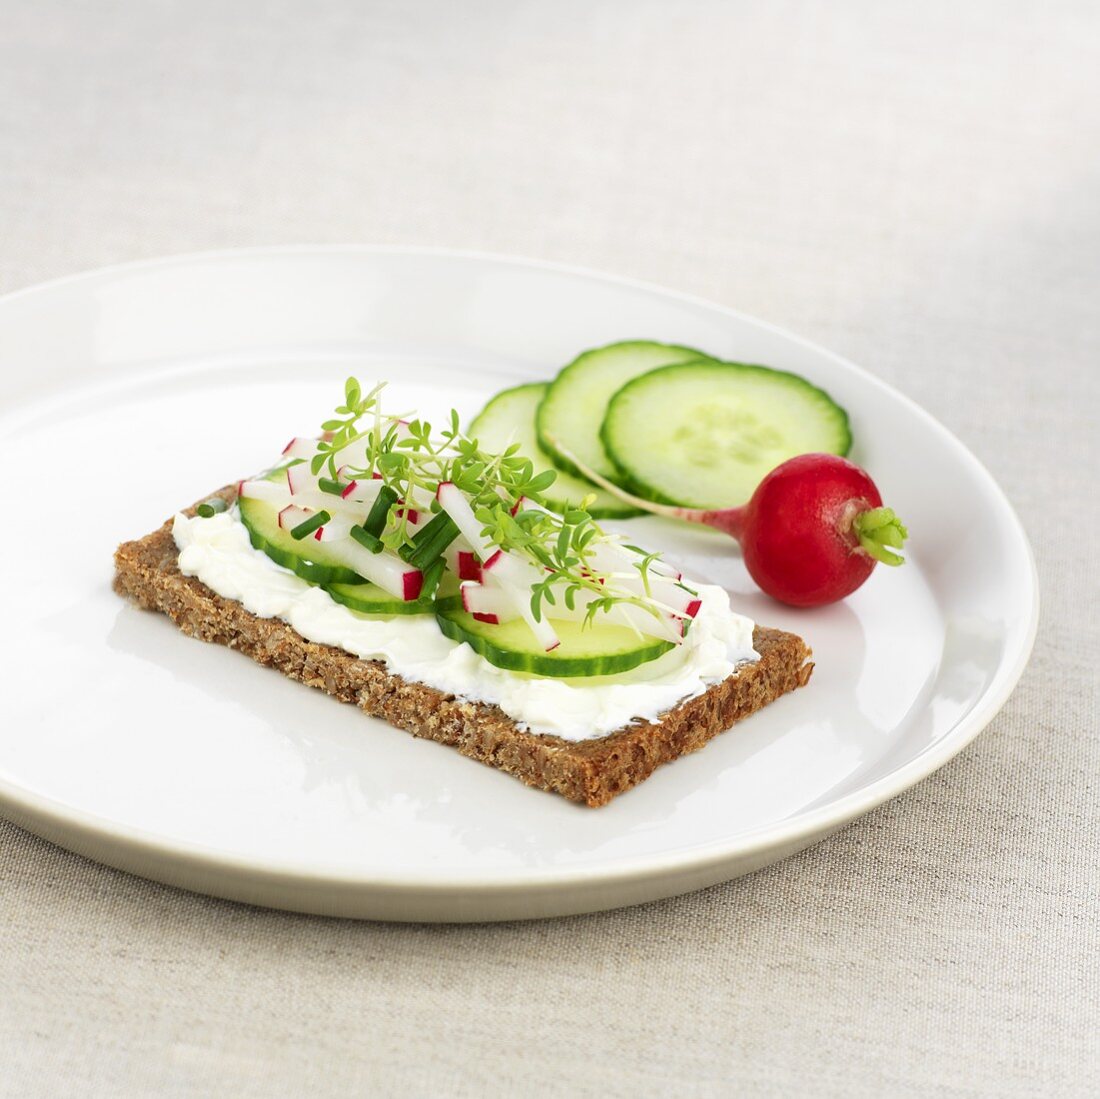 Soft cheese, cucumber, radishes and cress on wholemeal bread